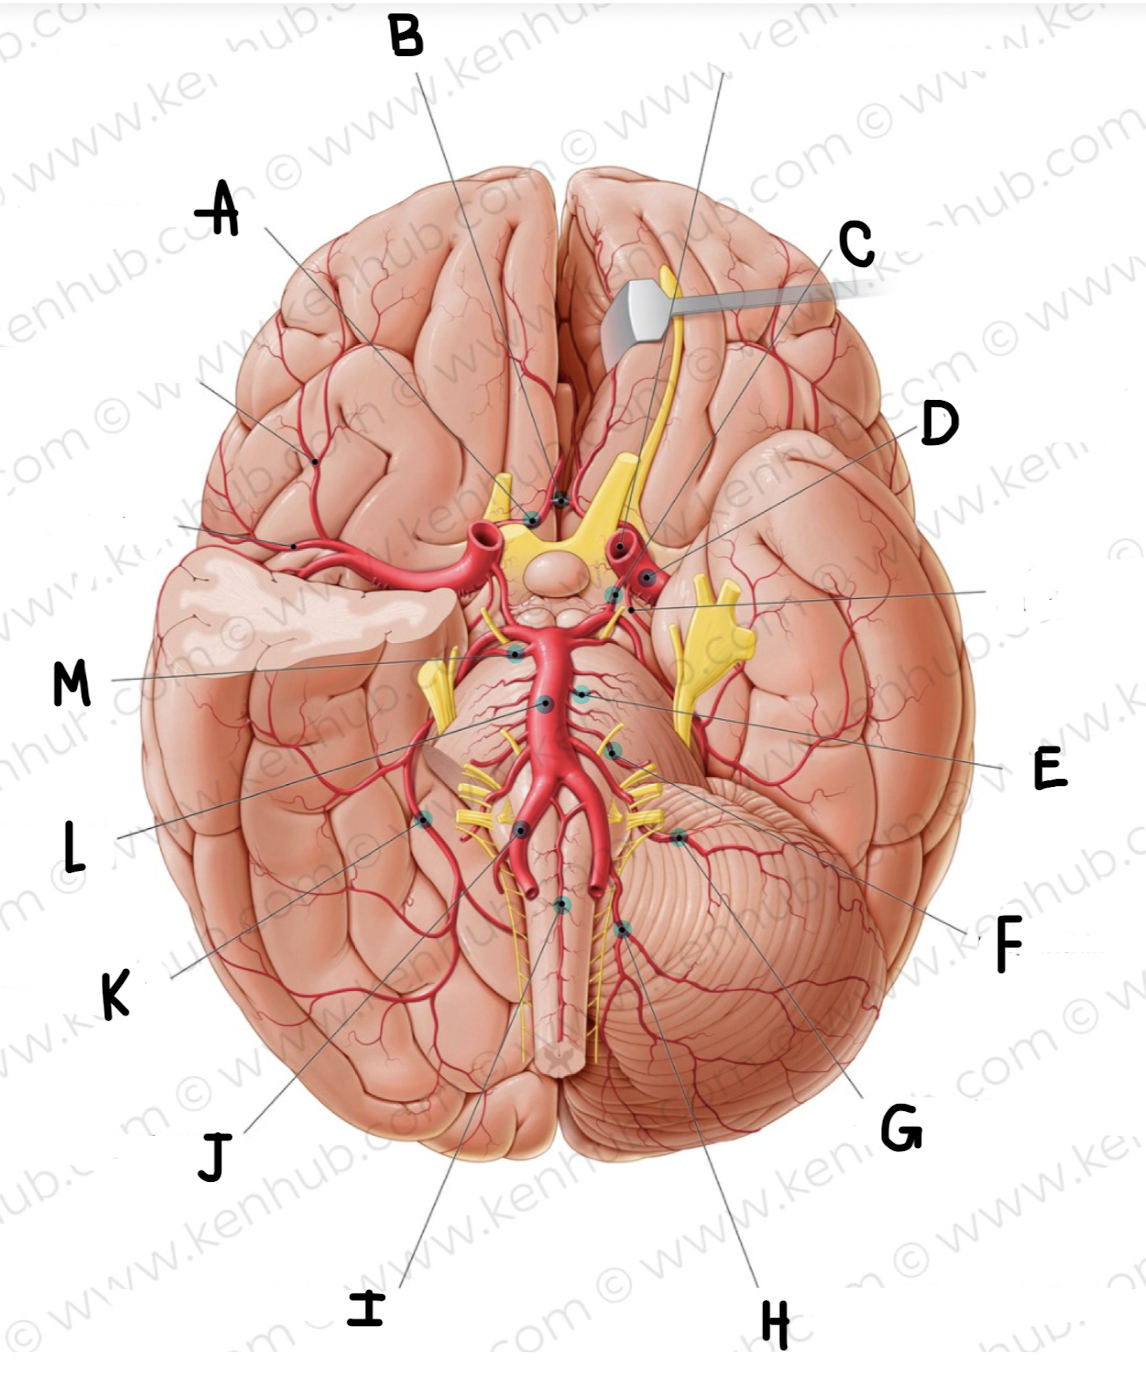 <p>What is the name of the artery labeled H?</p>